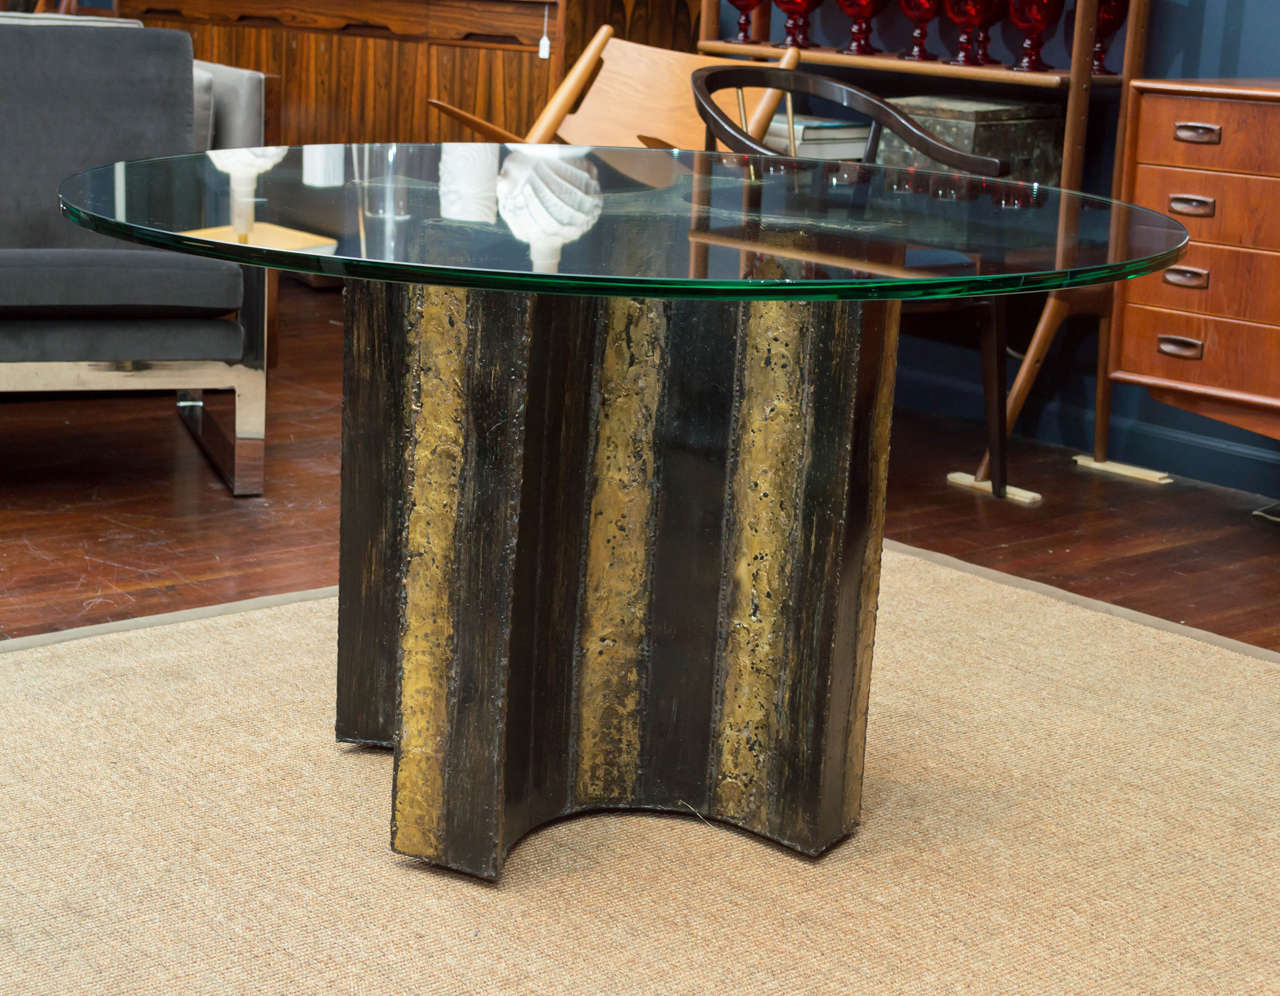 Rare and beautiful Paul Evans design dining table made from welded steel with braised brass decoration. 
Table base can support a larger glass top up to 6 foot diameter. 
Signed and dated.